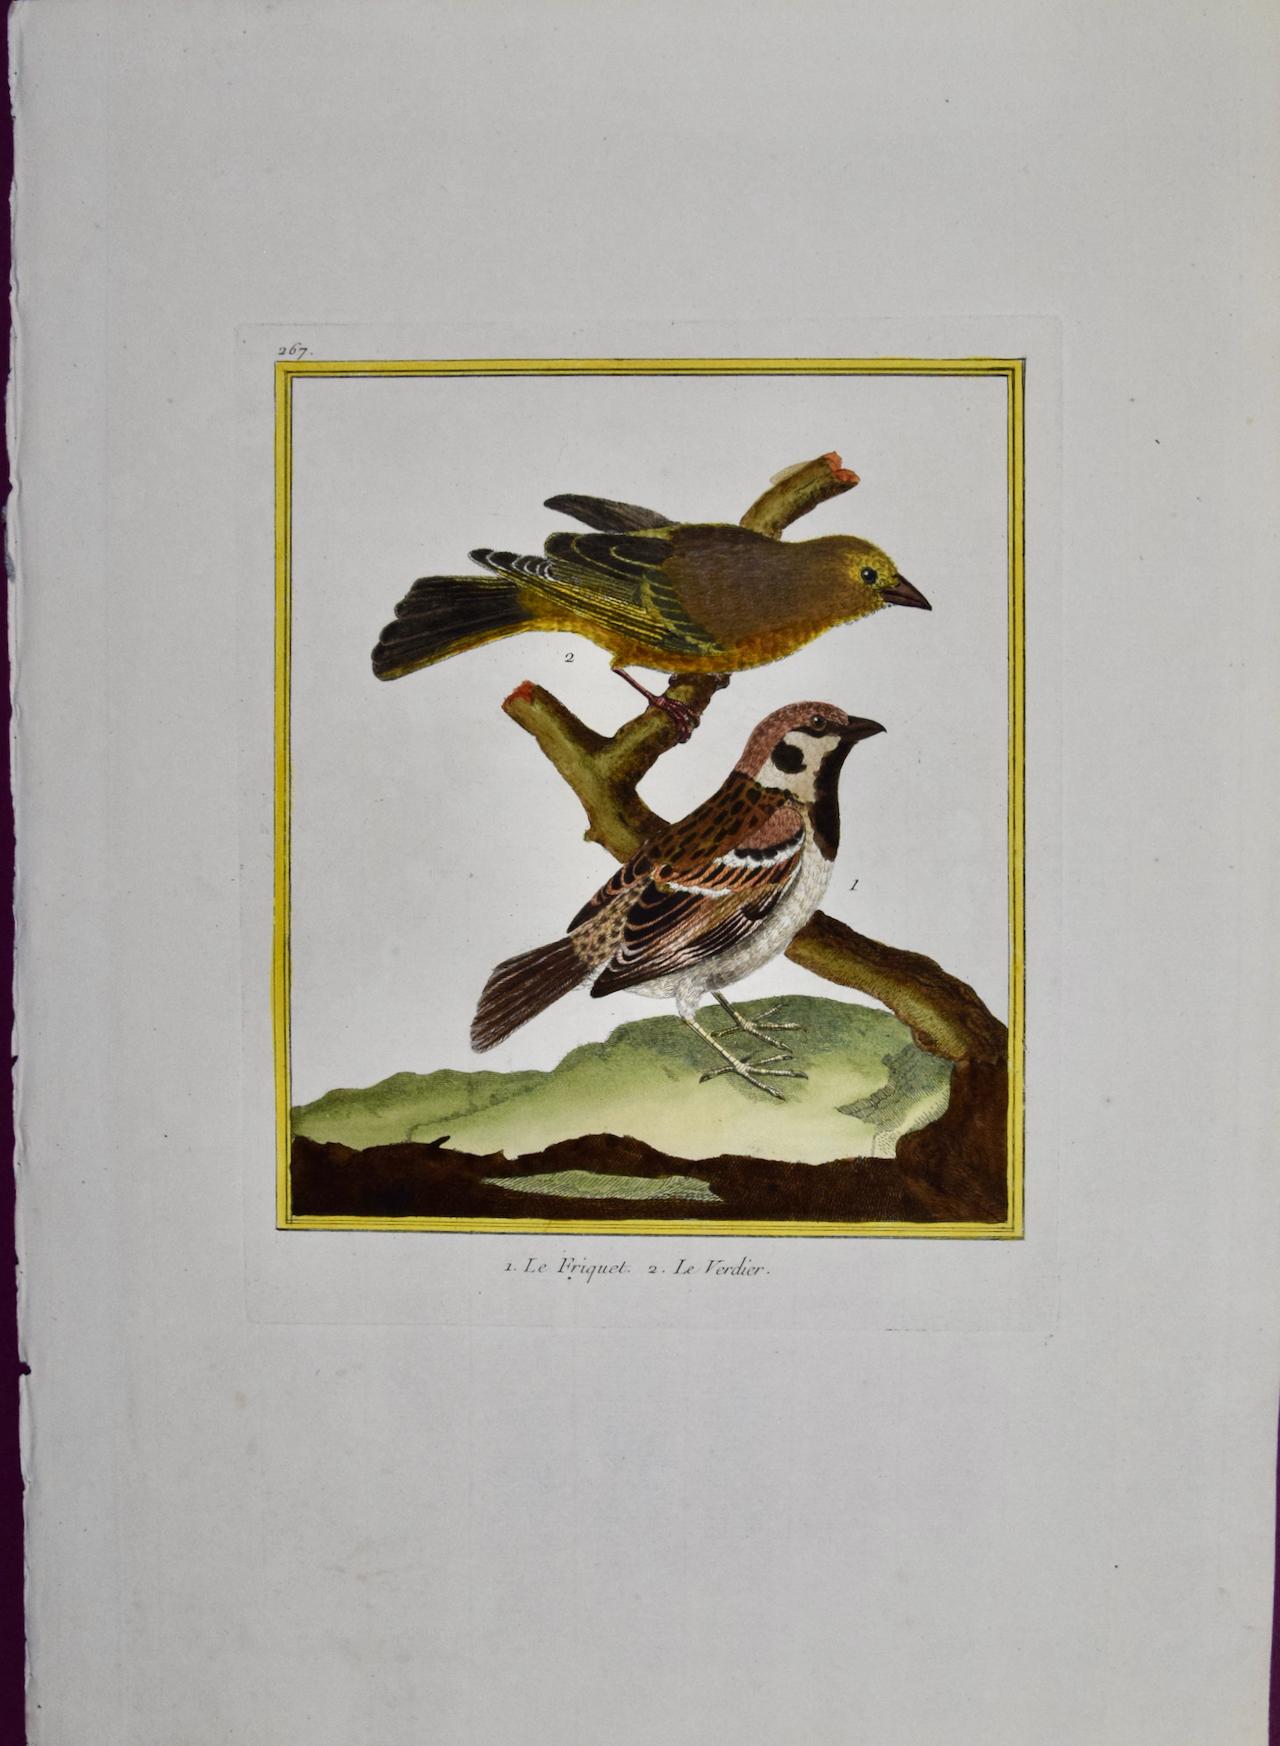 A Greenfinch & A Sparrow: An 18th Century Hand-colored Engraving by Martinet - Print by Francois Nicolas Martinet